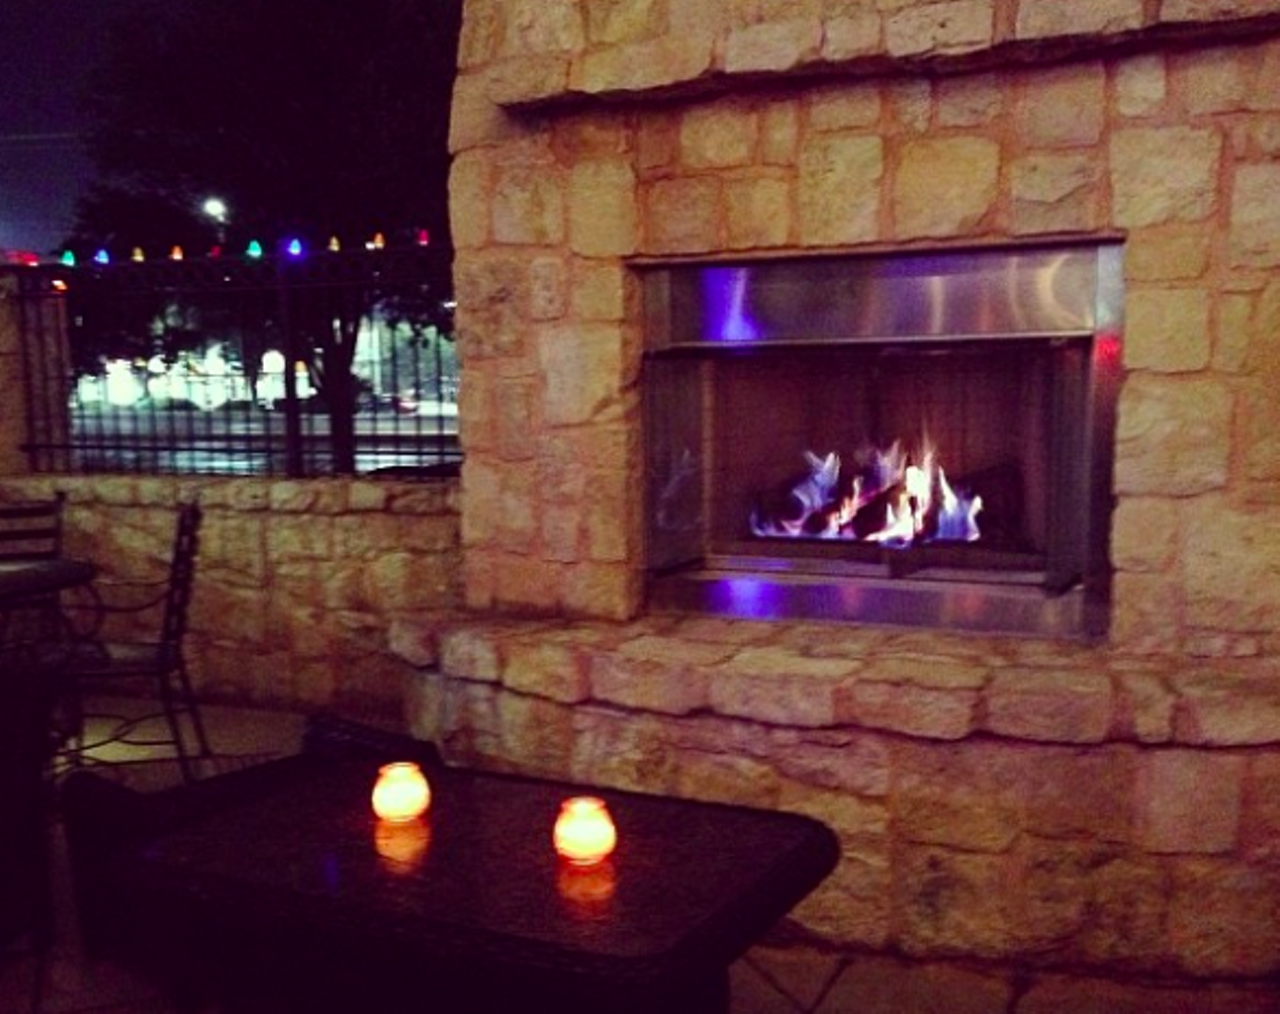 Stone Werks
Multiple locations, stonewerks.com
With four locations across San Antonio, this local chain serves American fare in a contemporary space, with thankfully includes a fireplace. Come for the food or drink (or both!), but we’re sure the fireplace will keep you coming back time and time again.
Photo via Instagram / jufu